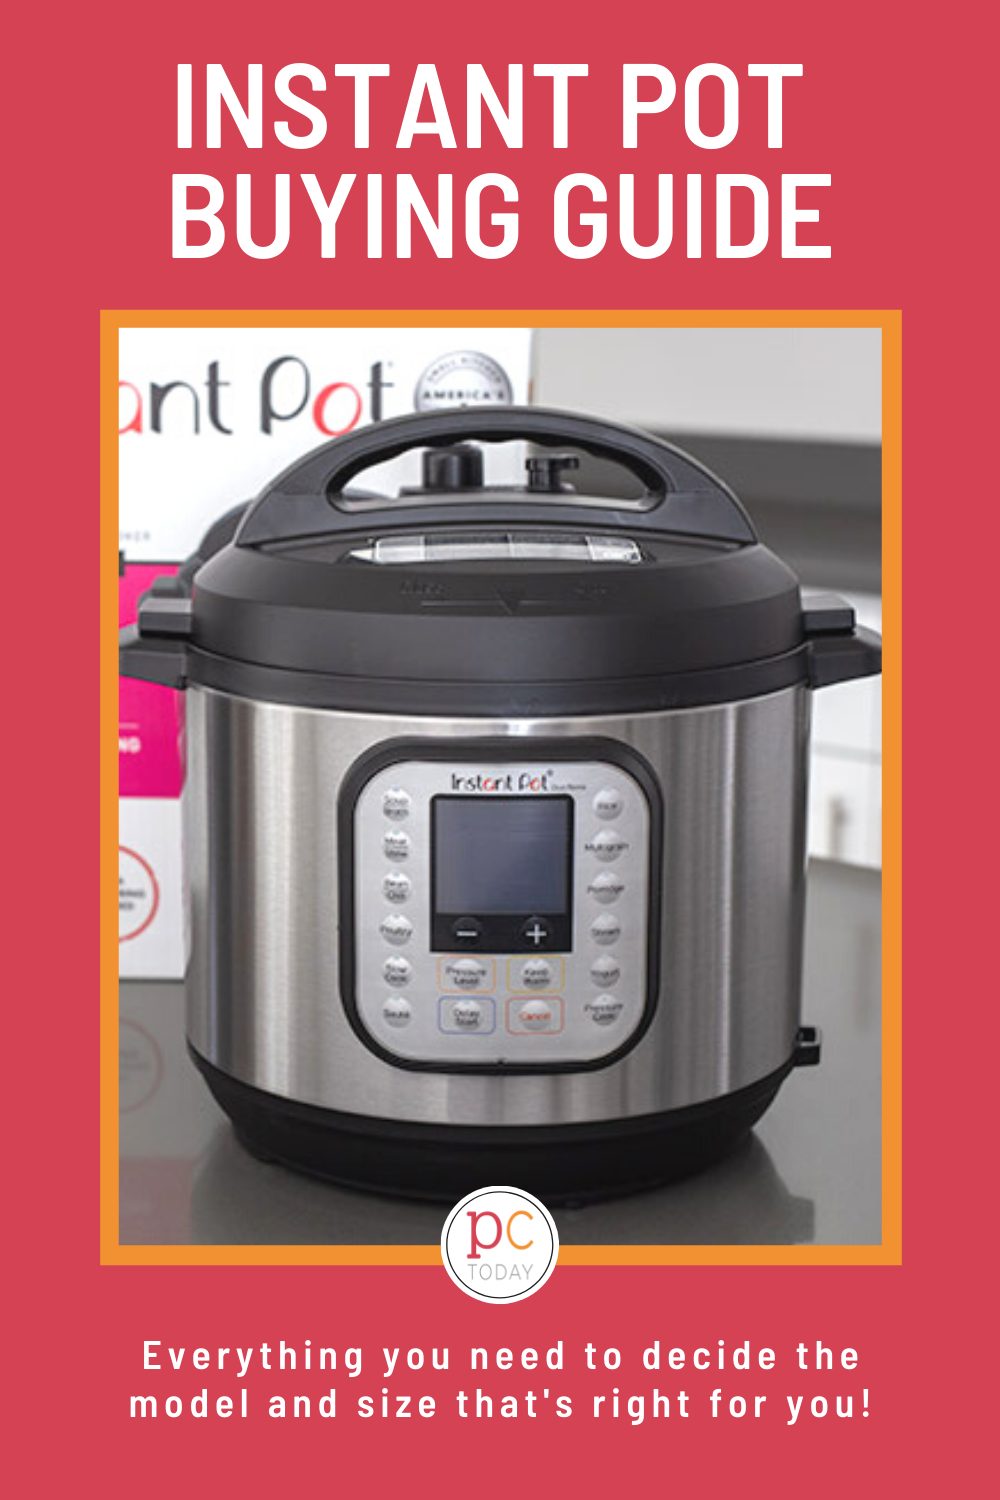 pinterest image on a pink background promoting our Instant Pot buying guide, featuring a duo nova on a gray countertop via @PressureCook2da